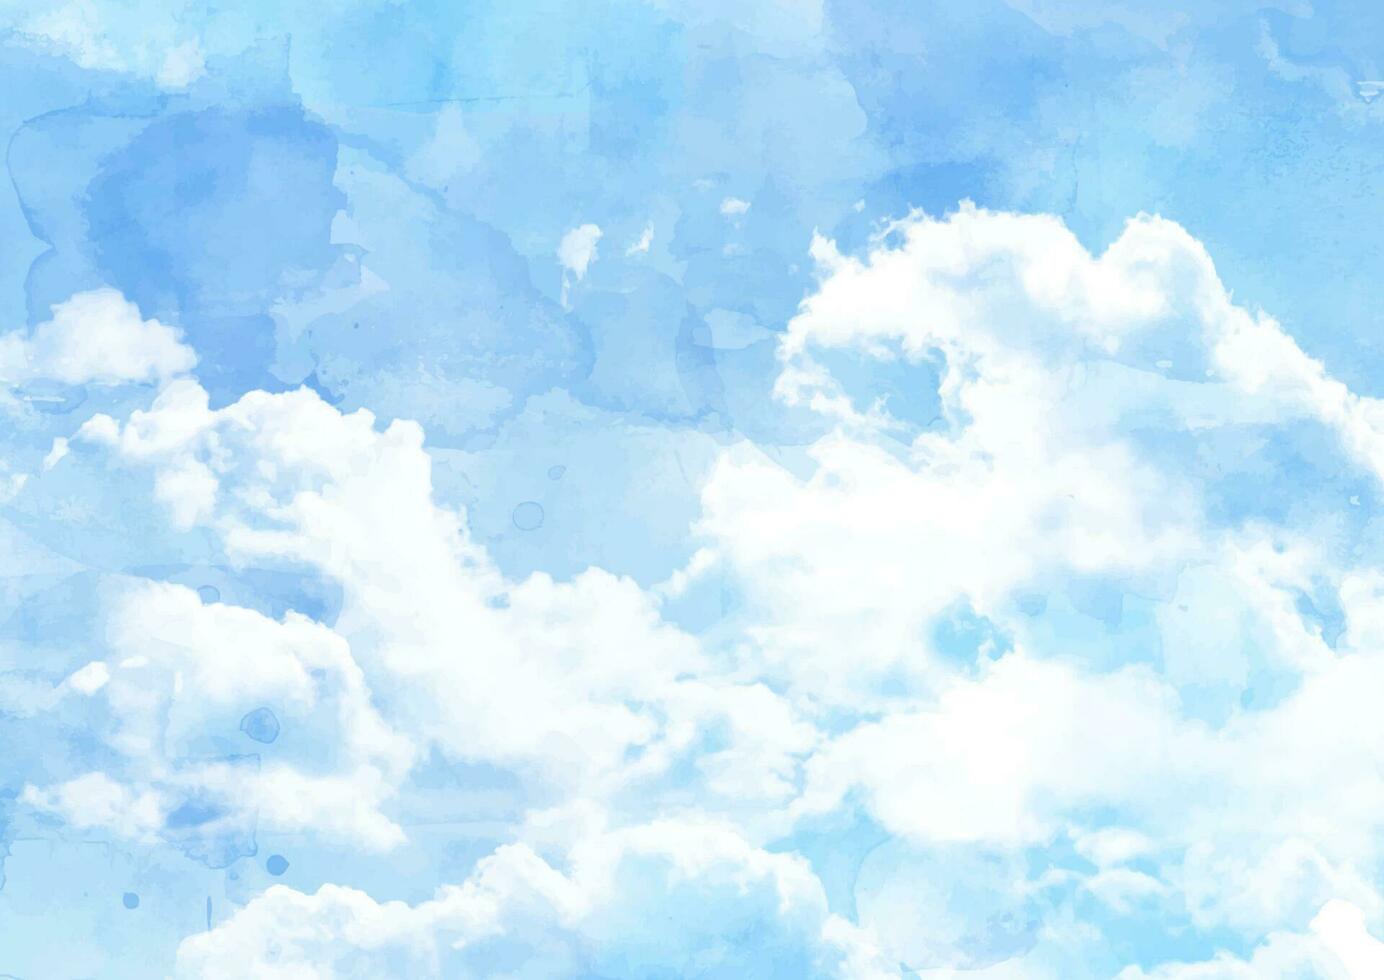 Watercolour background with painted clouds vector